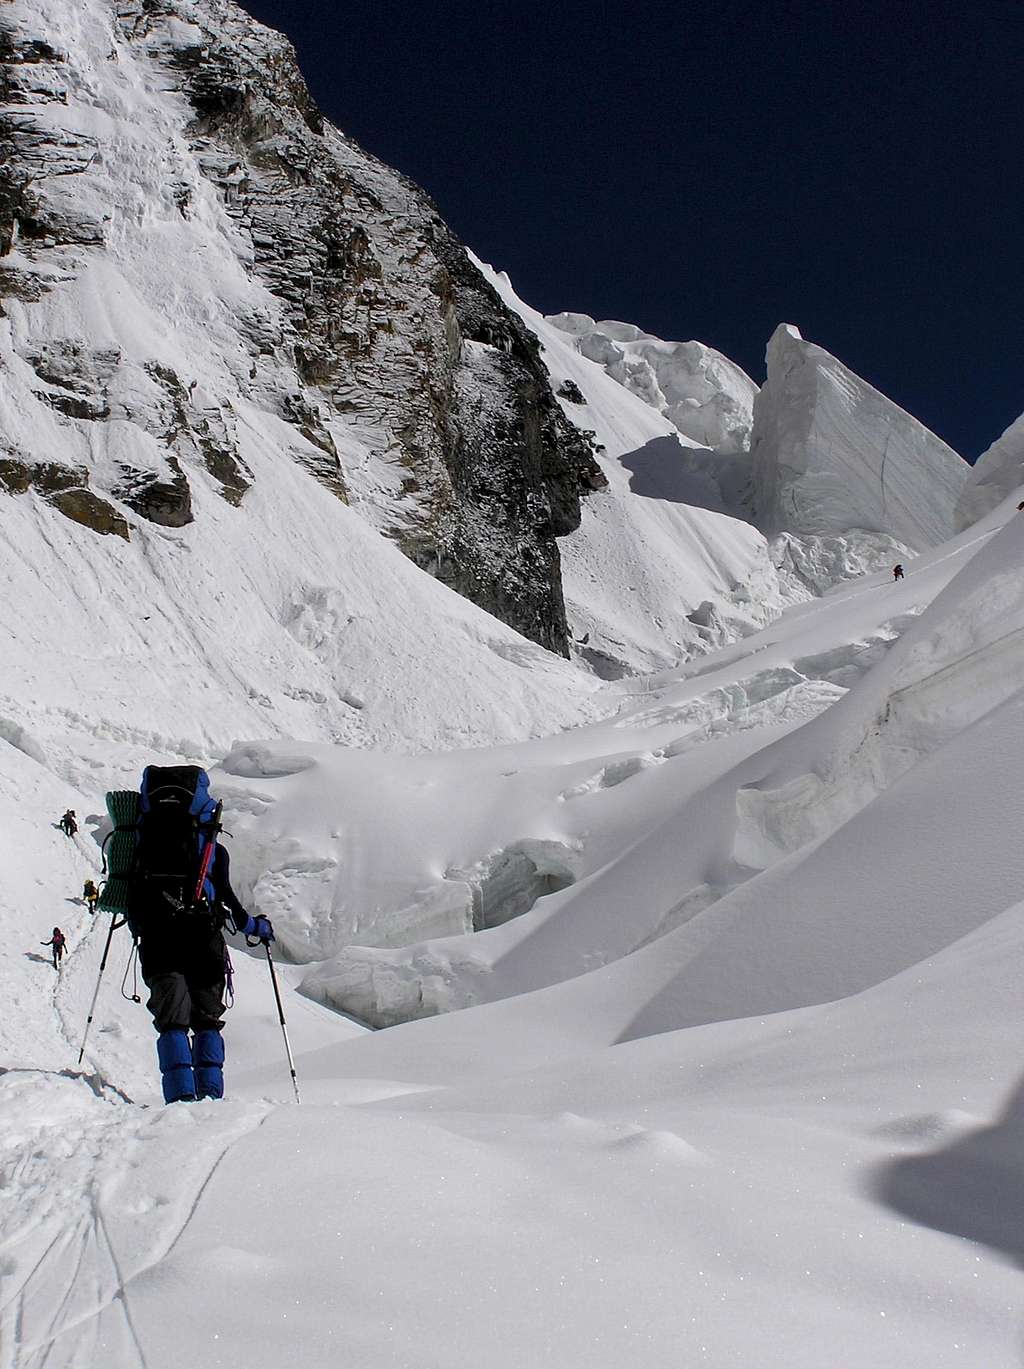 Climb to camp 2 on Khan Tengri's classic southern route